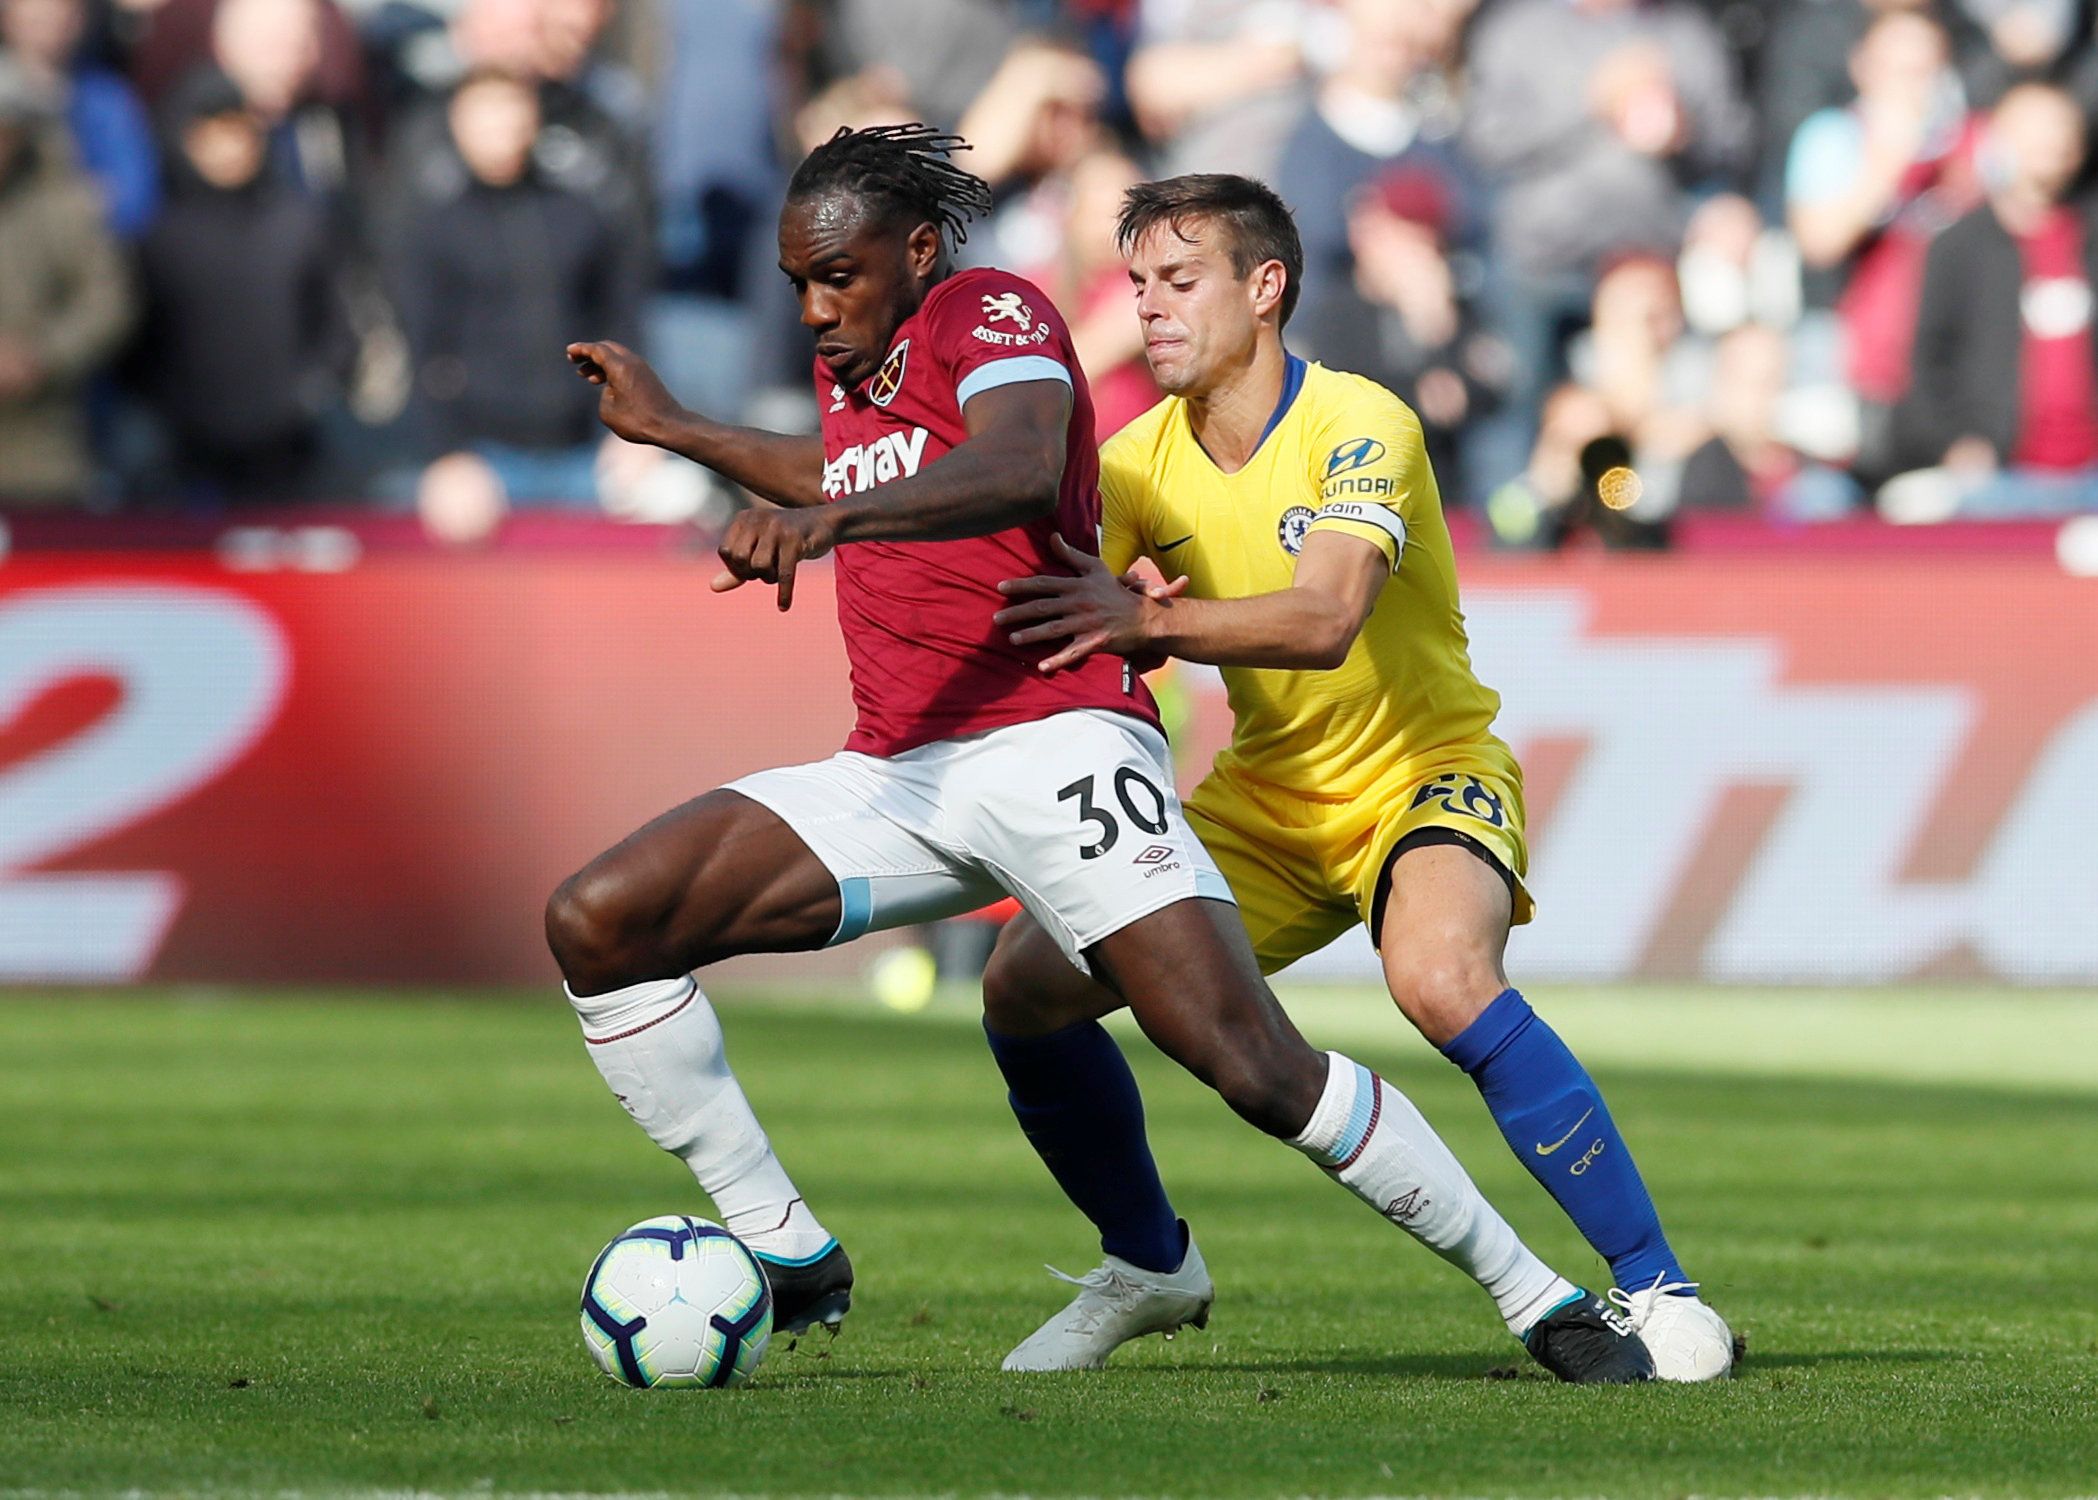 Soccer Football - Premier League - West Ham United v Chelsea - London Stadium, London, Britain - September 23, 2018  West Ham's Michail Antonio in action with Chelsea's Cesar Azpilicueta         REUTERS/David Klein  EDITORIAL USE ONLY. No use with unauthorized audio, video, data, fixture lists, club/league logos or 